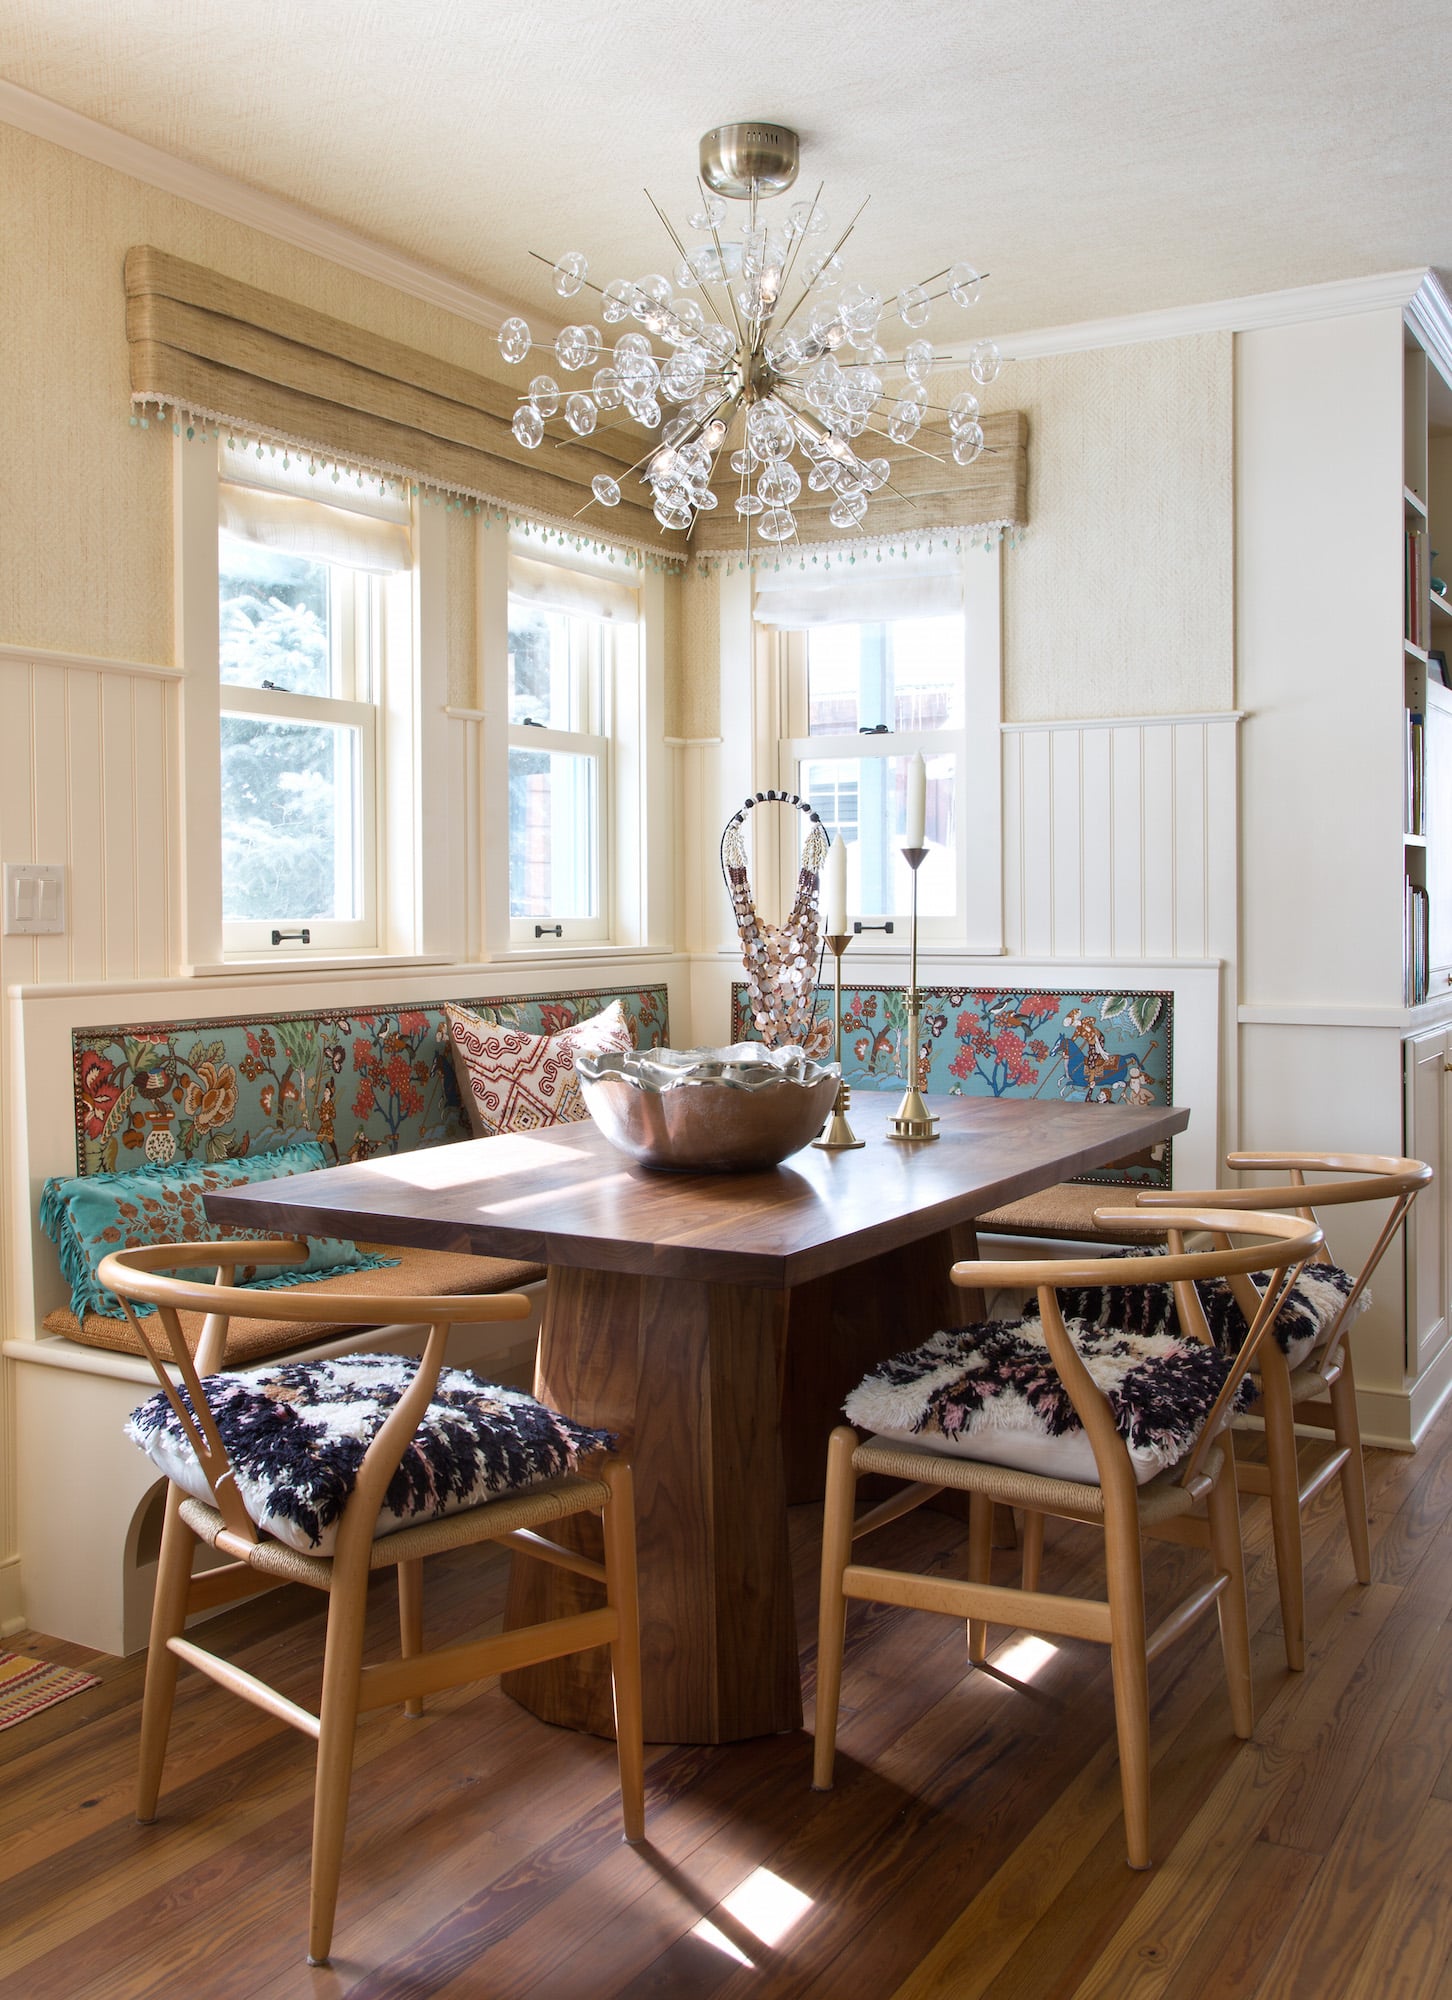 For a dining space in Crested Butte, Colorado, the designer upholstered a banquette in Hurlingham fabric from Cowtan & Tout and wrapped the space — even the ceiling — with Phillip Jefferies’ Diamond Weave grass-cloth wallcovering in Richmond Bisque. Photo by Emily Minton Redfield